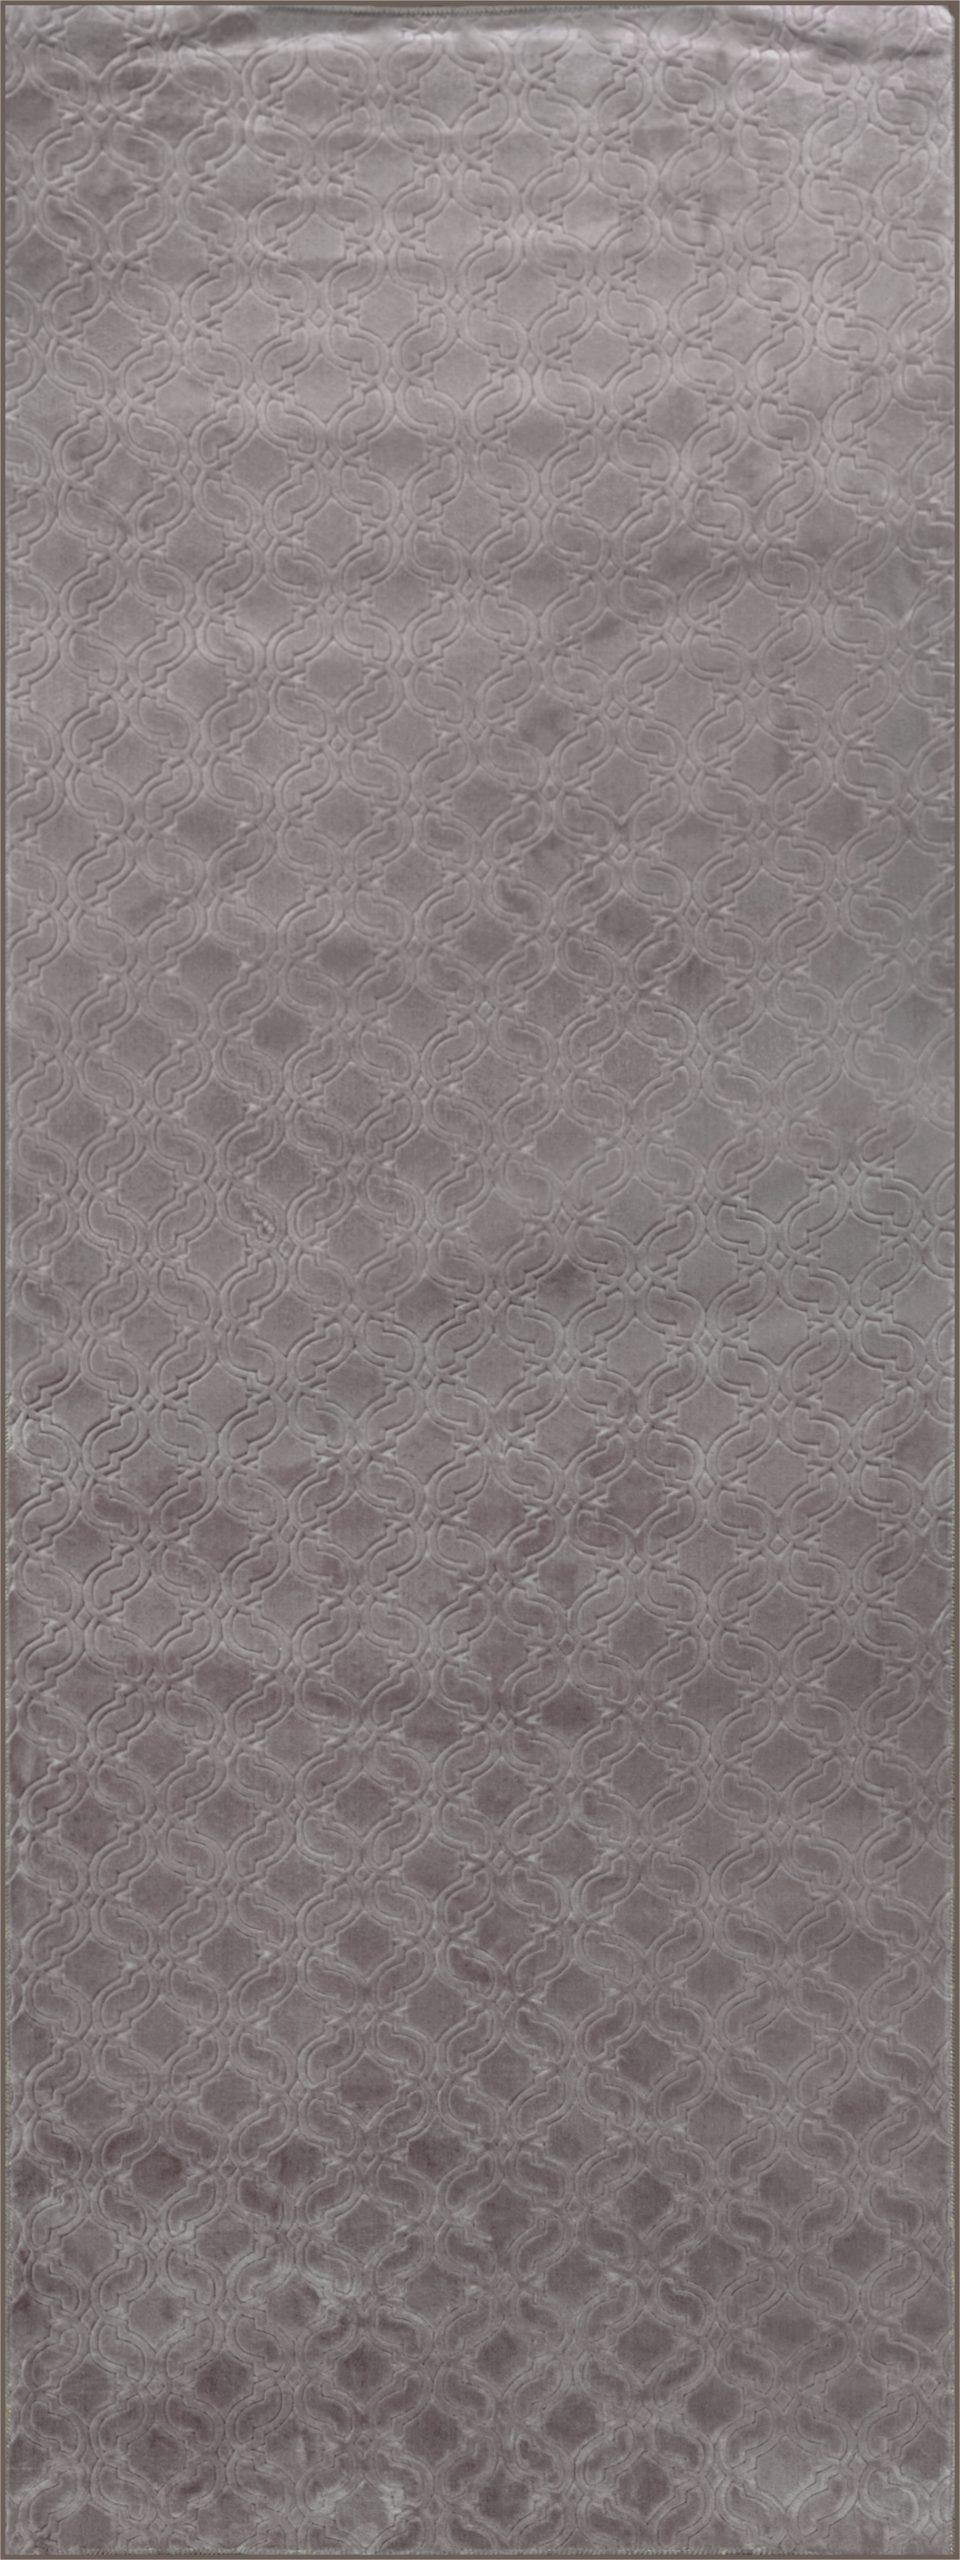 Taupe Colored Bath Rugs Gauna Brown Taupe Print Absorbent soft Multiple Non Slip Geometric Bath Rug